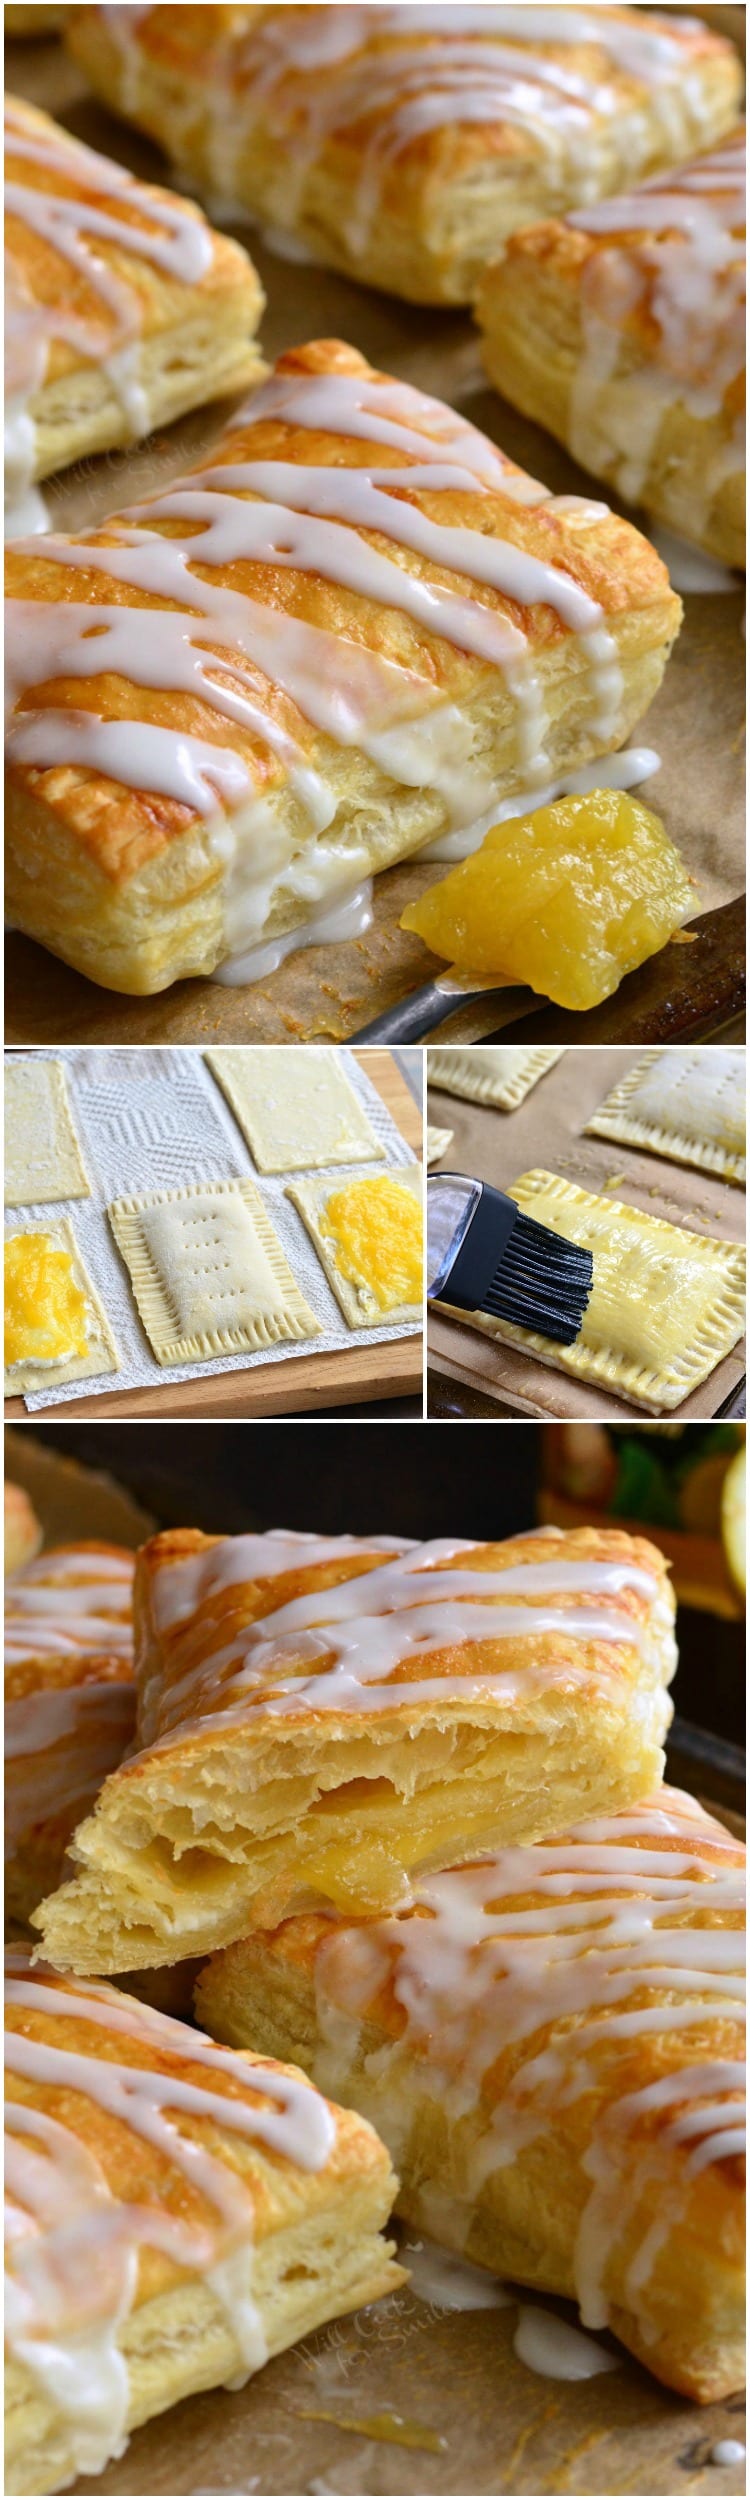 collage top photo is Lemon Cheesecake Hand Pies on a baking sheet, 2nd photo putting egg wash on pastry, staked pies on a baking sheet 